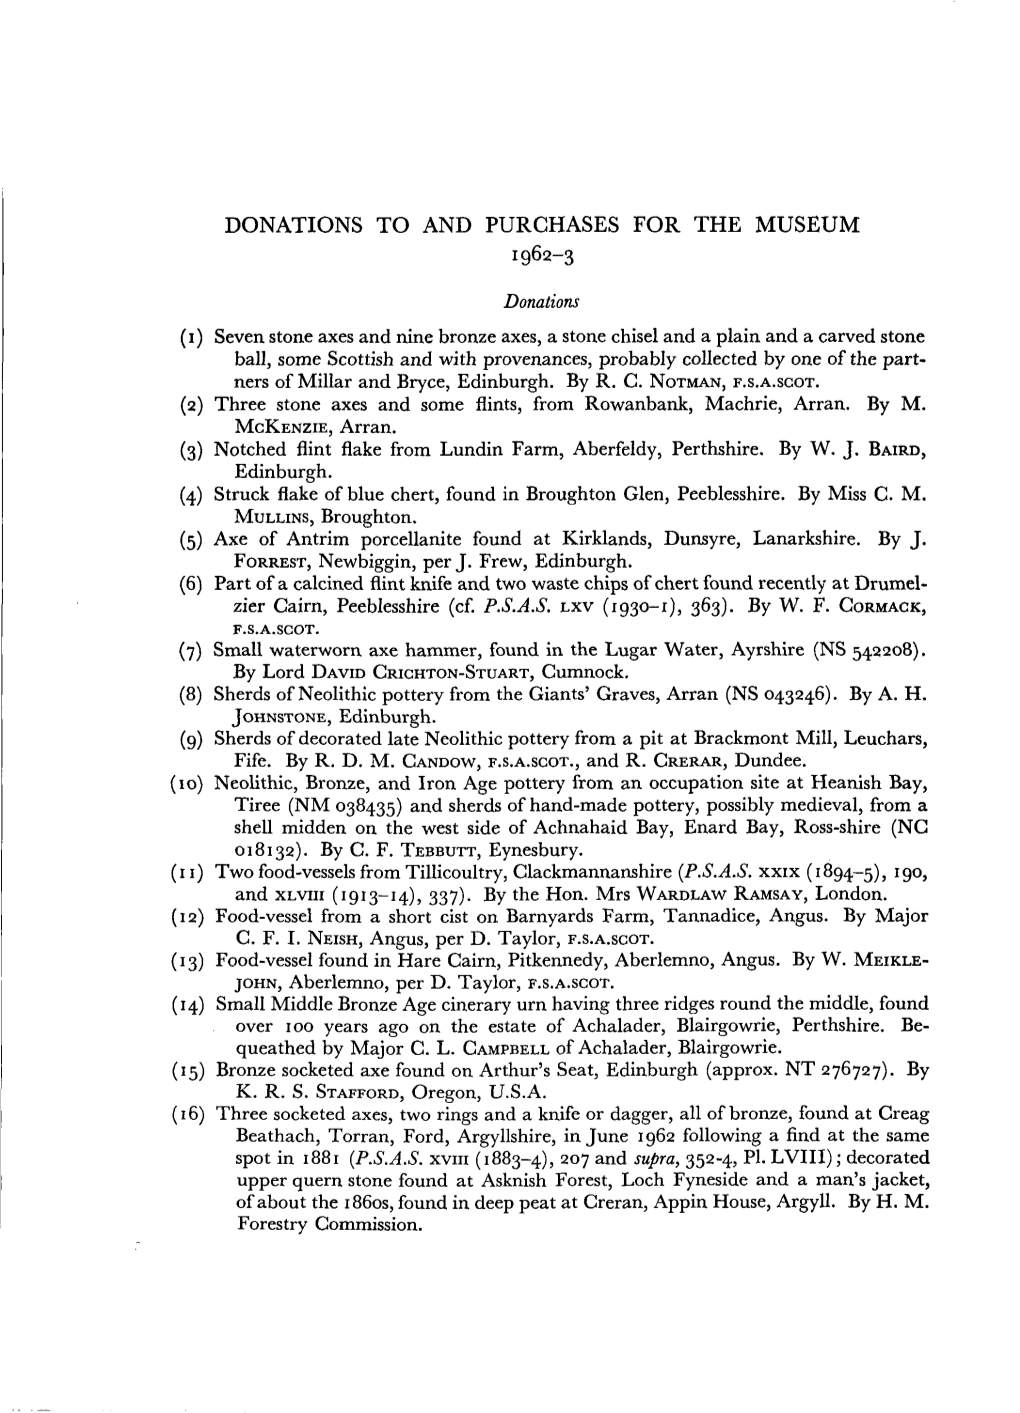 Donations to and Purchases for the Museum 1962-3